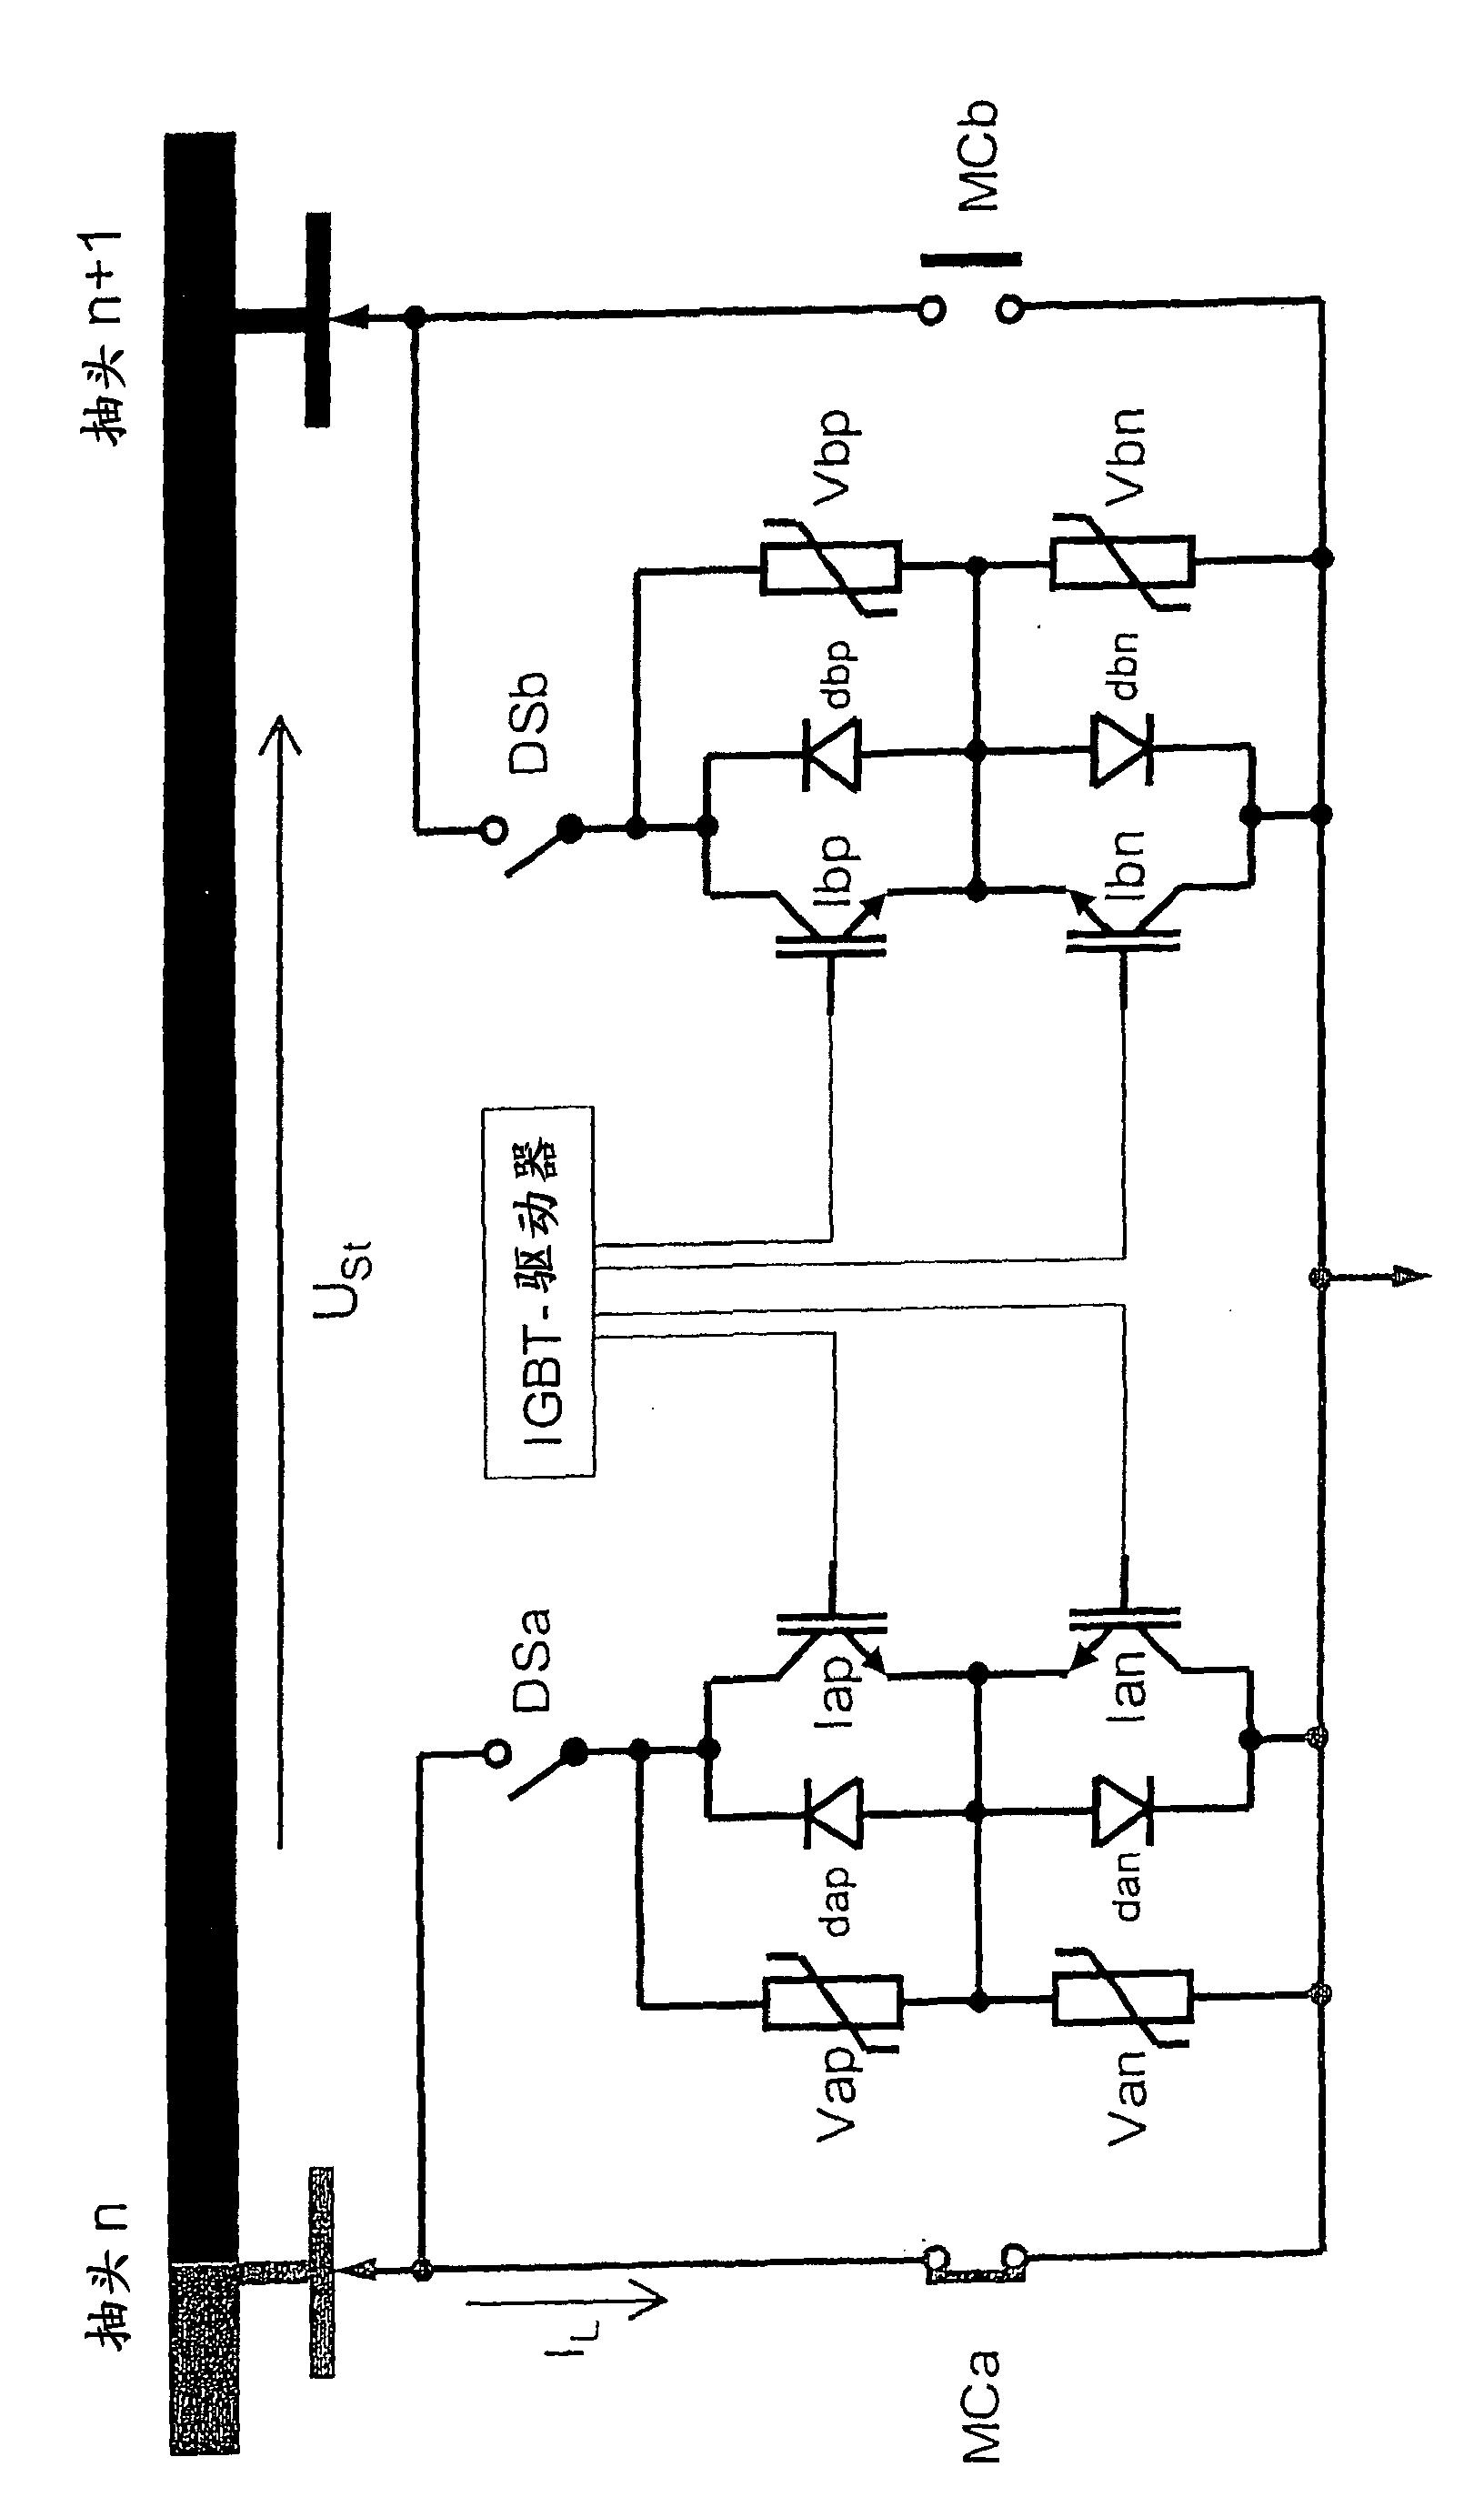 Method for switching without any interruption between winding taps on a tap-changing transformer